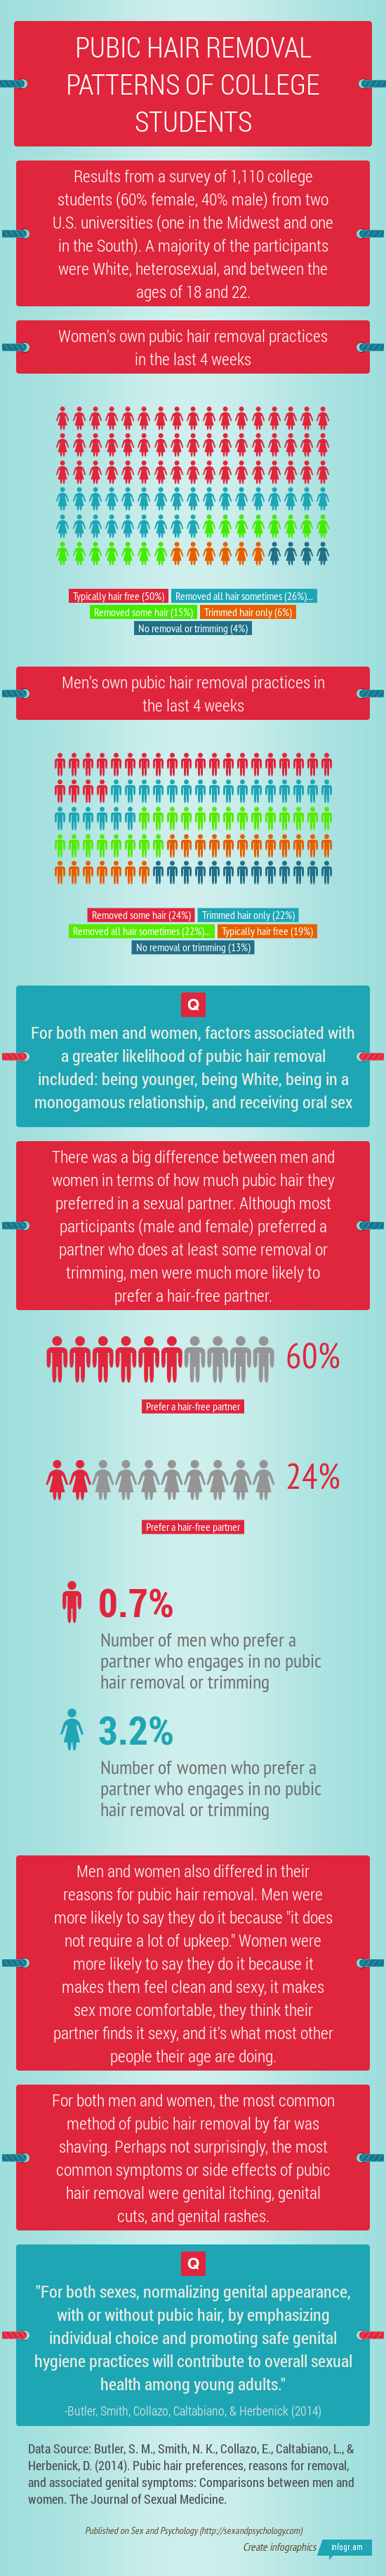 Infographic: Pubic Hair Removal Practices Of College Students - Sex and  Psychology